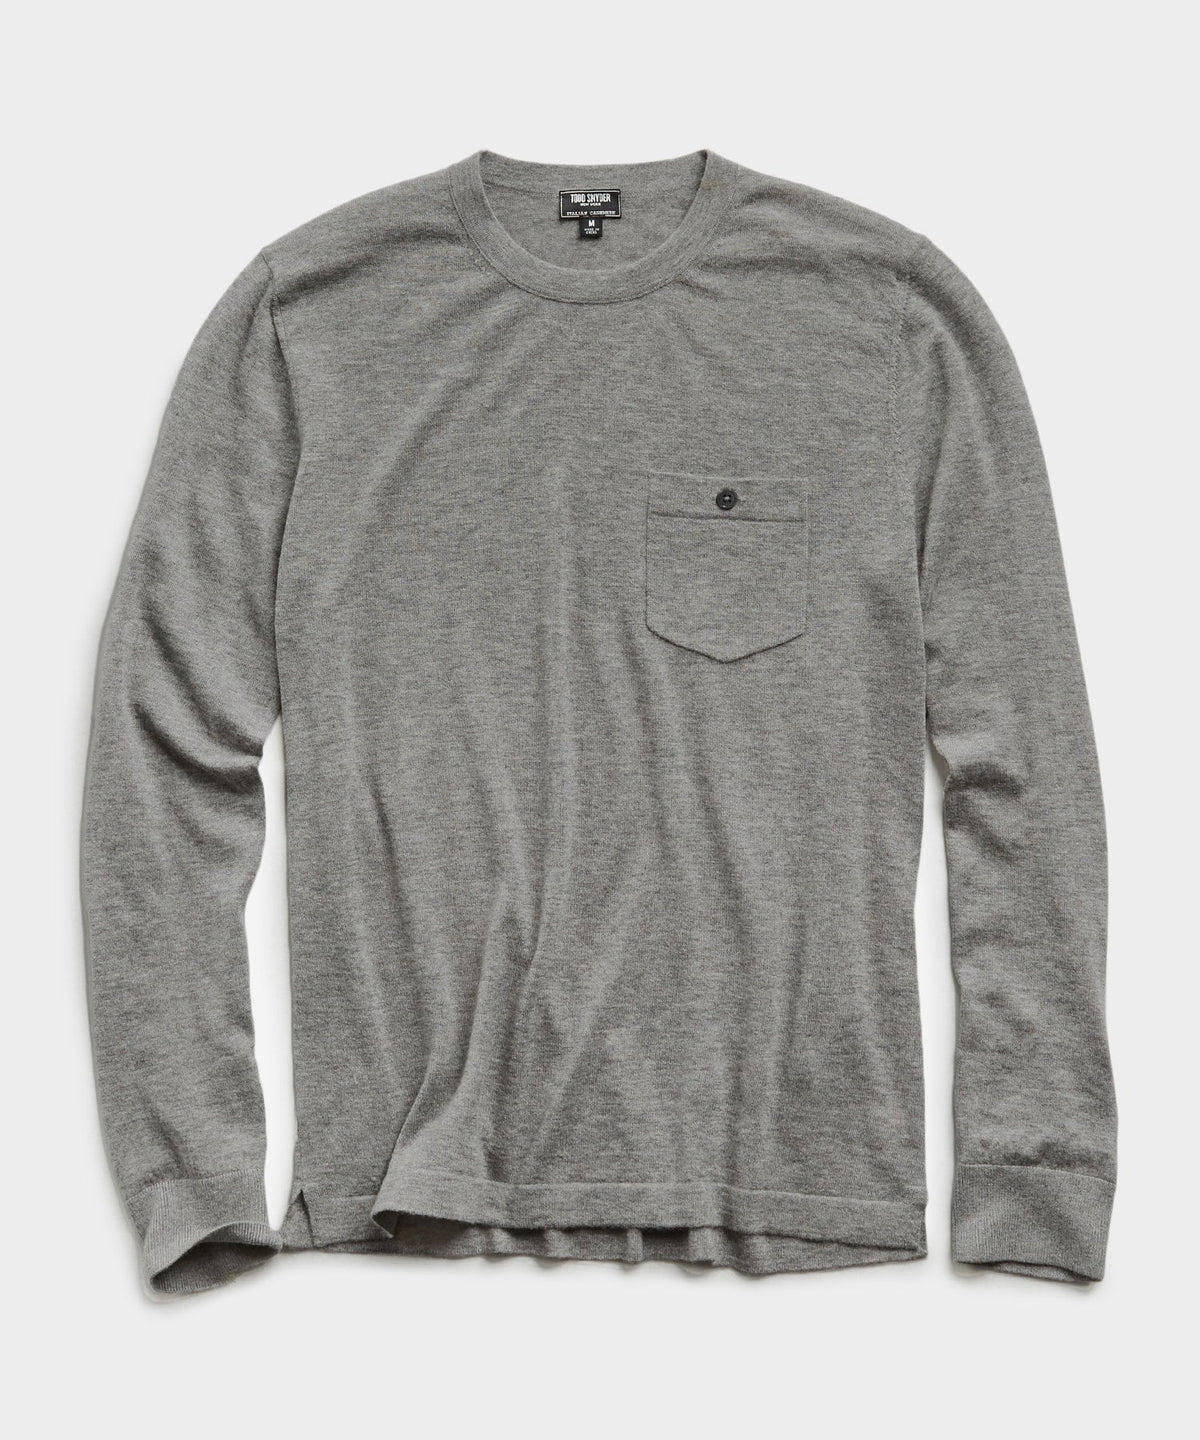 Cashmere Pocket Tee in Oxford Grey